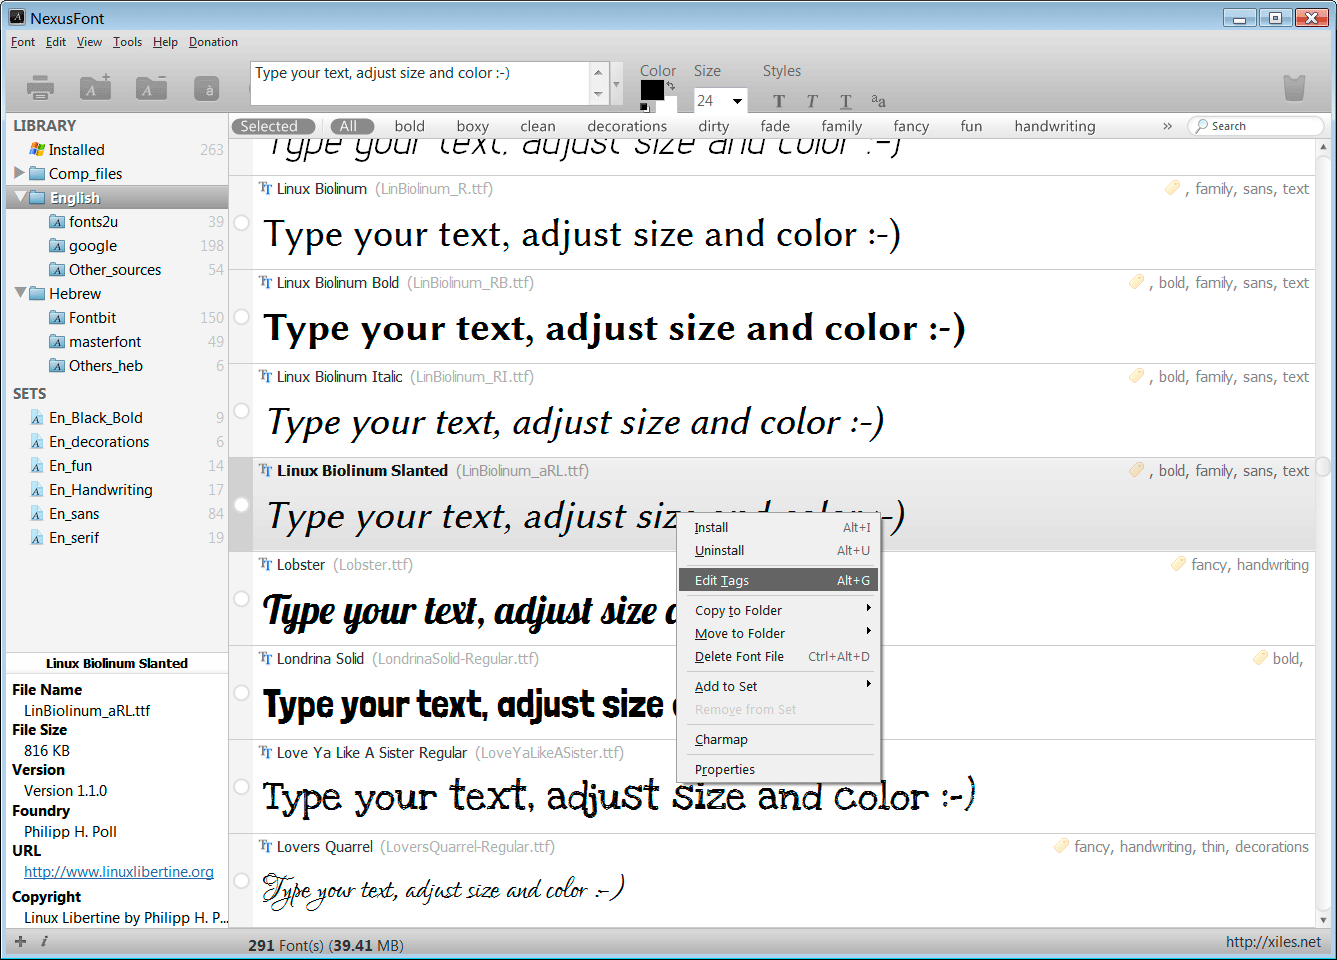 Right click a font to add/edit tags